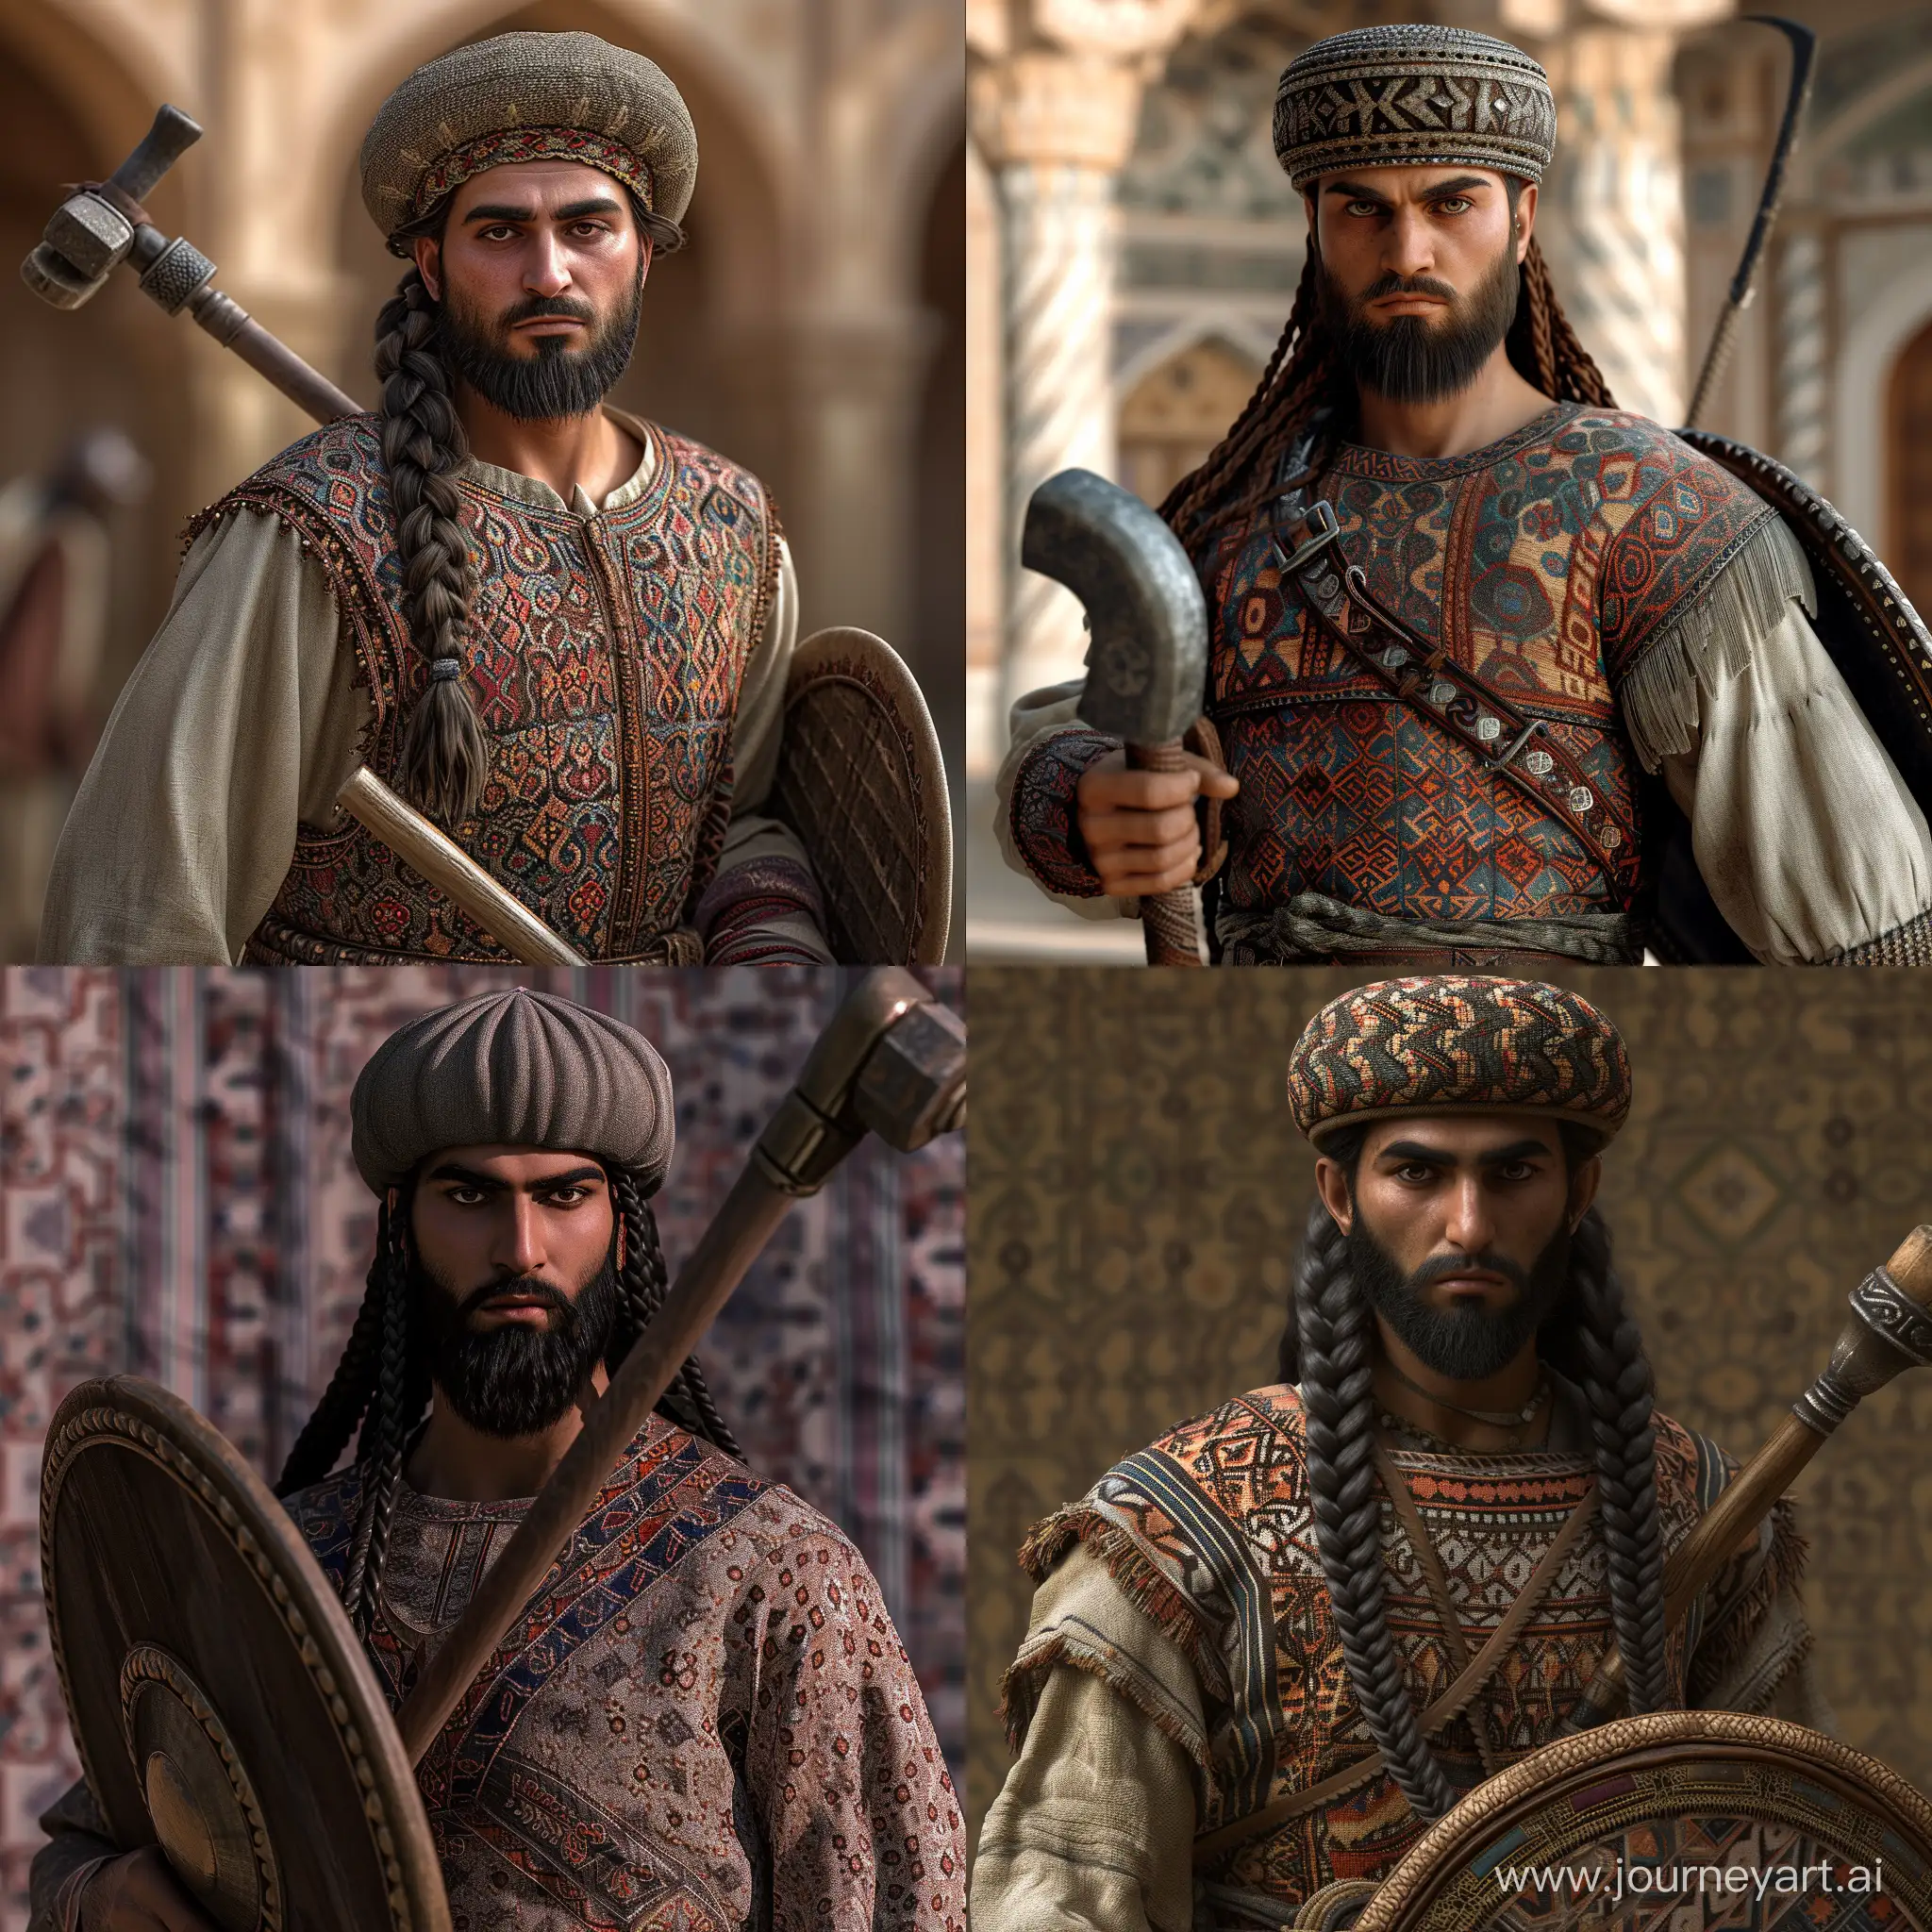 Seljuk warrior at Esfahan. In the year 1060. Wearing fabric garments with patterns. Long braided hair. Small rounded cap. Asian slant eyes. Average bearded. Equipping mace and small rounded shield. Cinematic shot. Realistic, 8K, HD